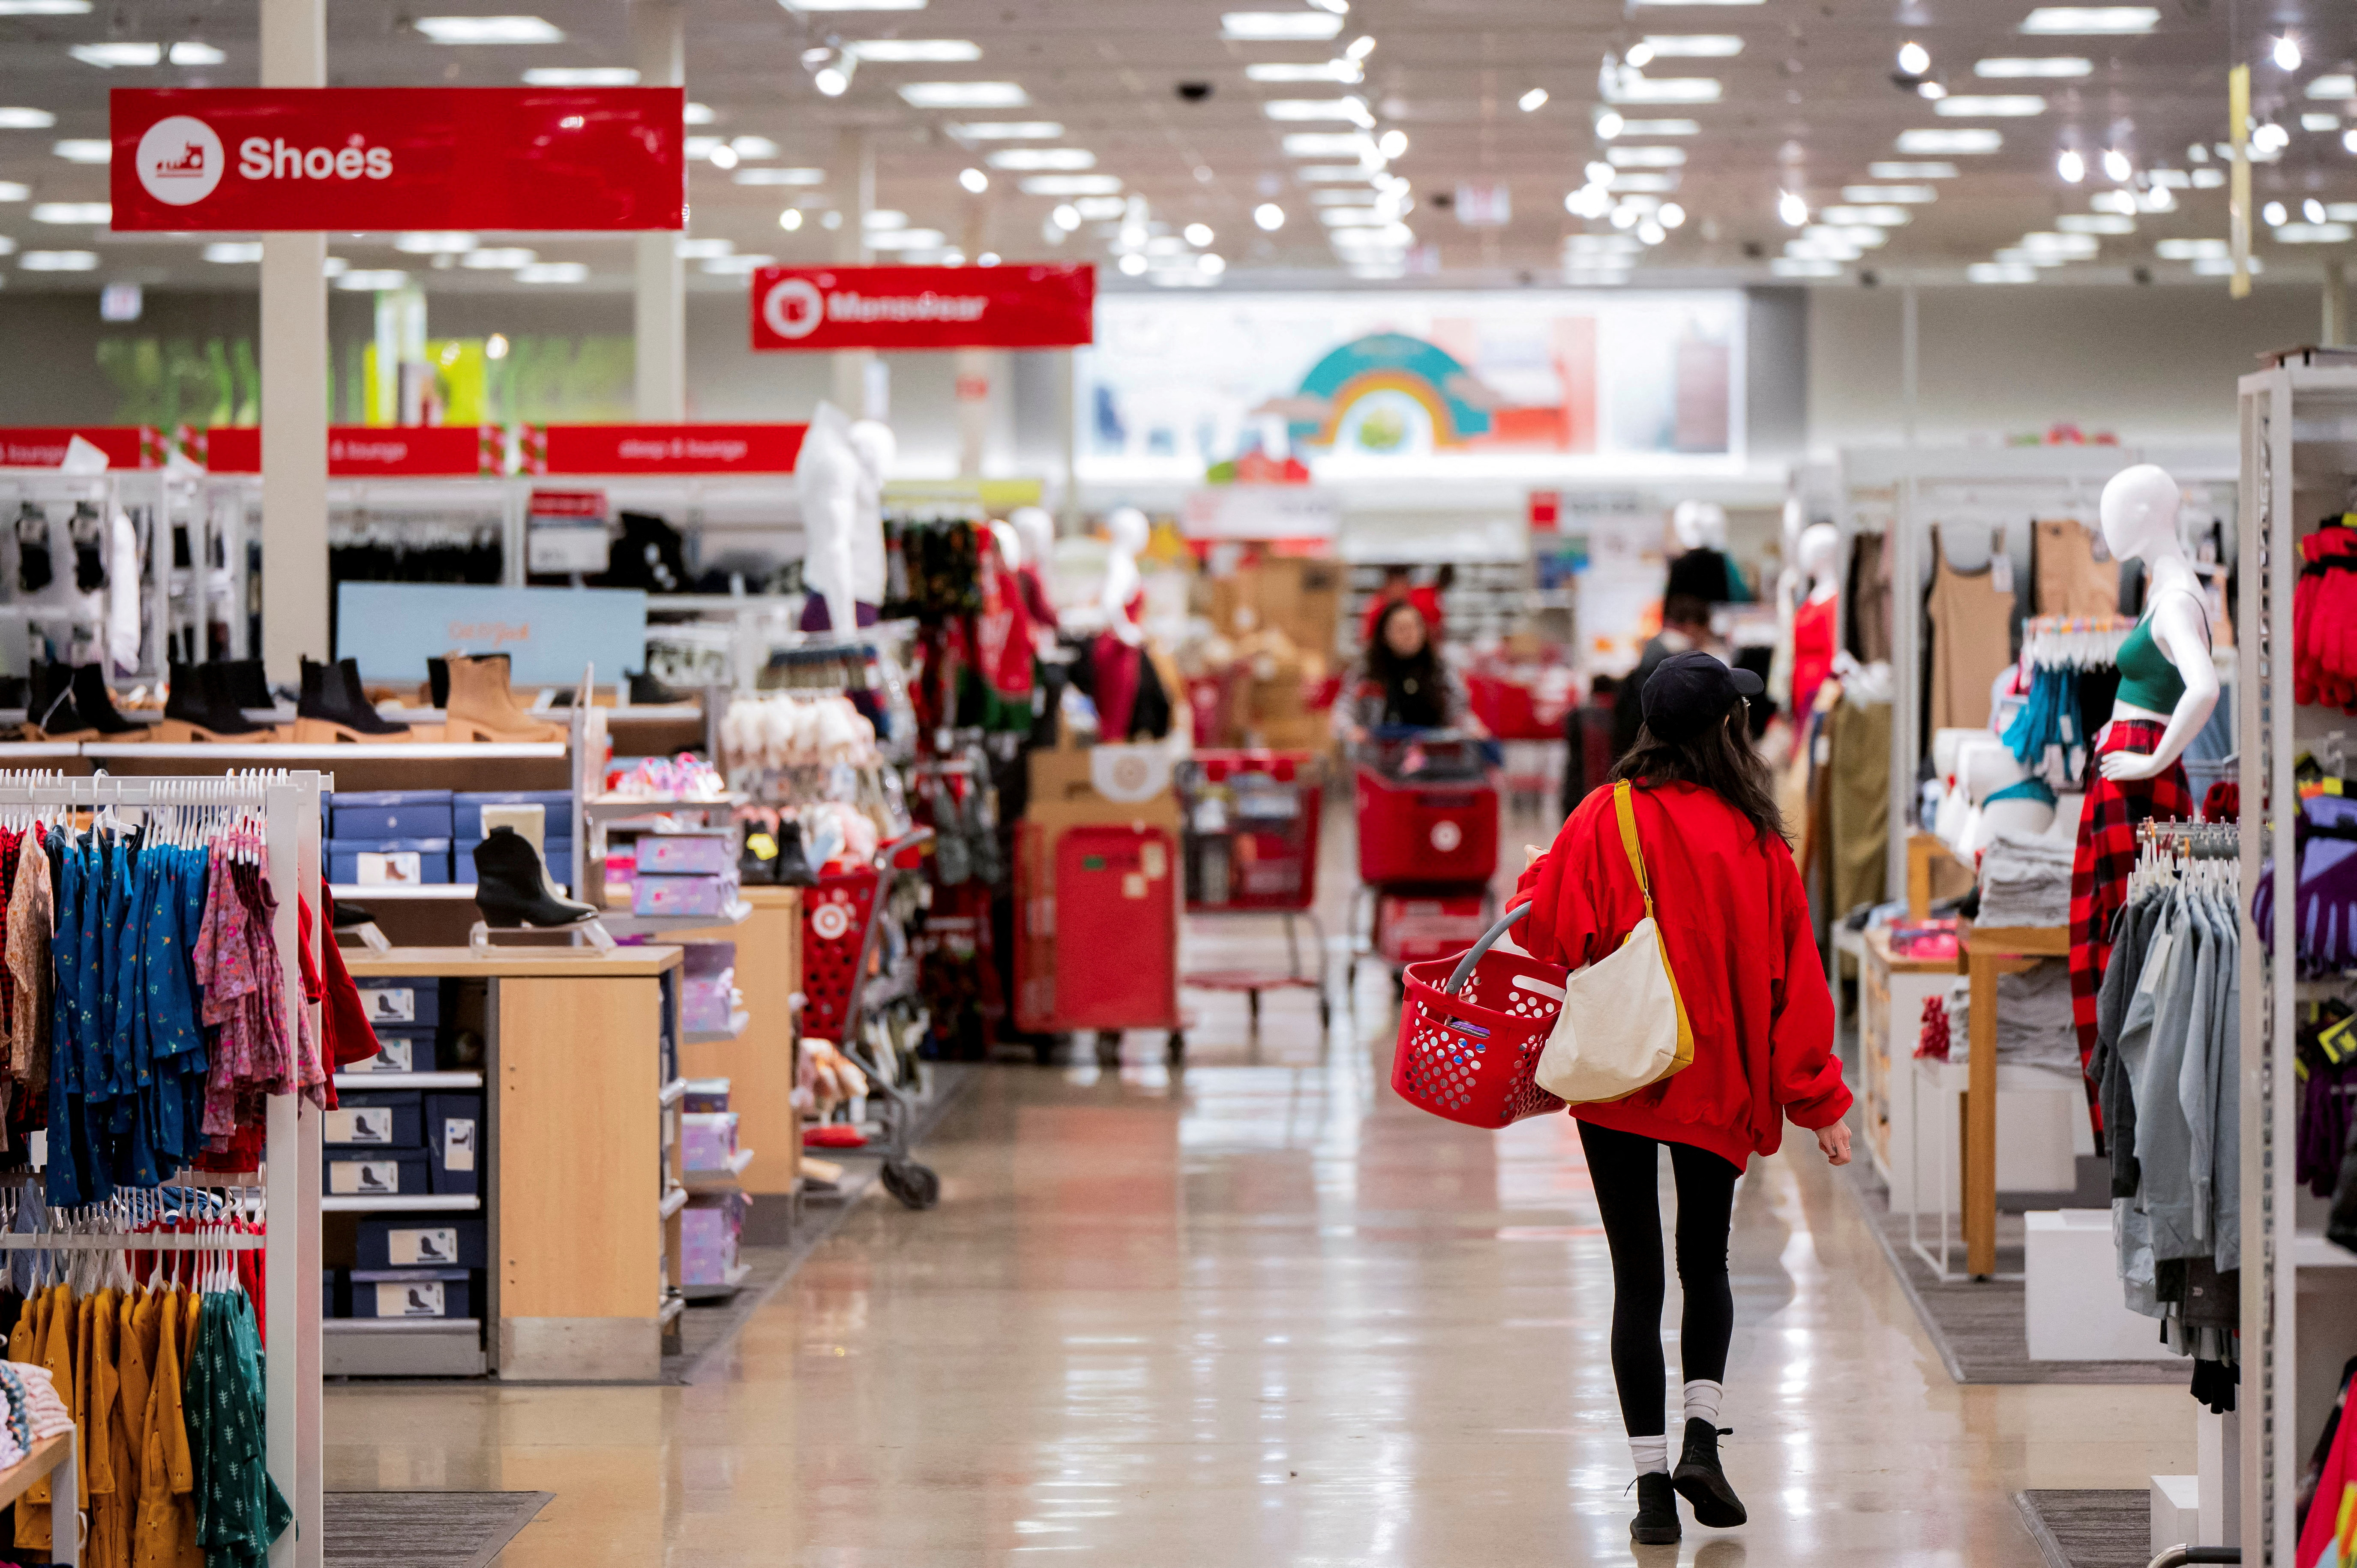 Targeting Black Friday – How did Target profit during 's